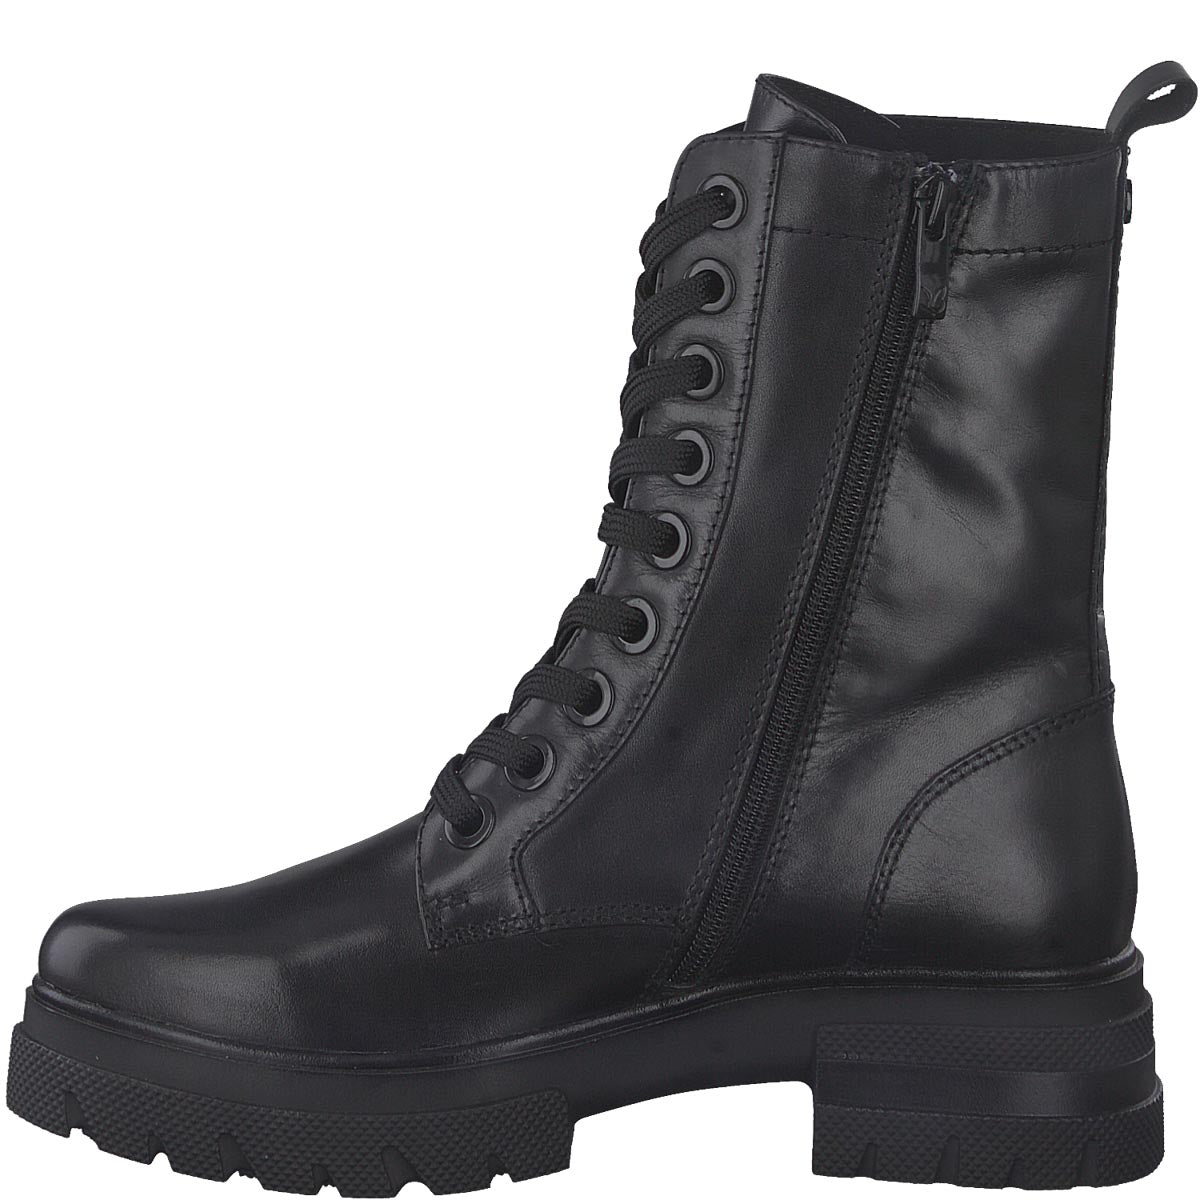 Black Lace-Up Combat Boots: Caprice - Stylish with Innovative Grip Technology